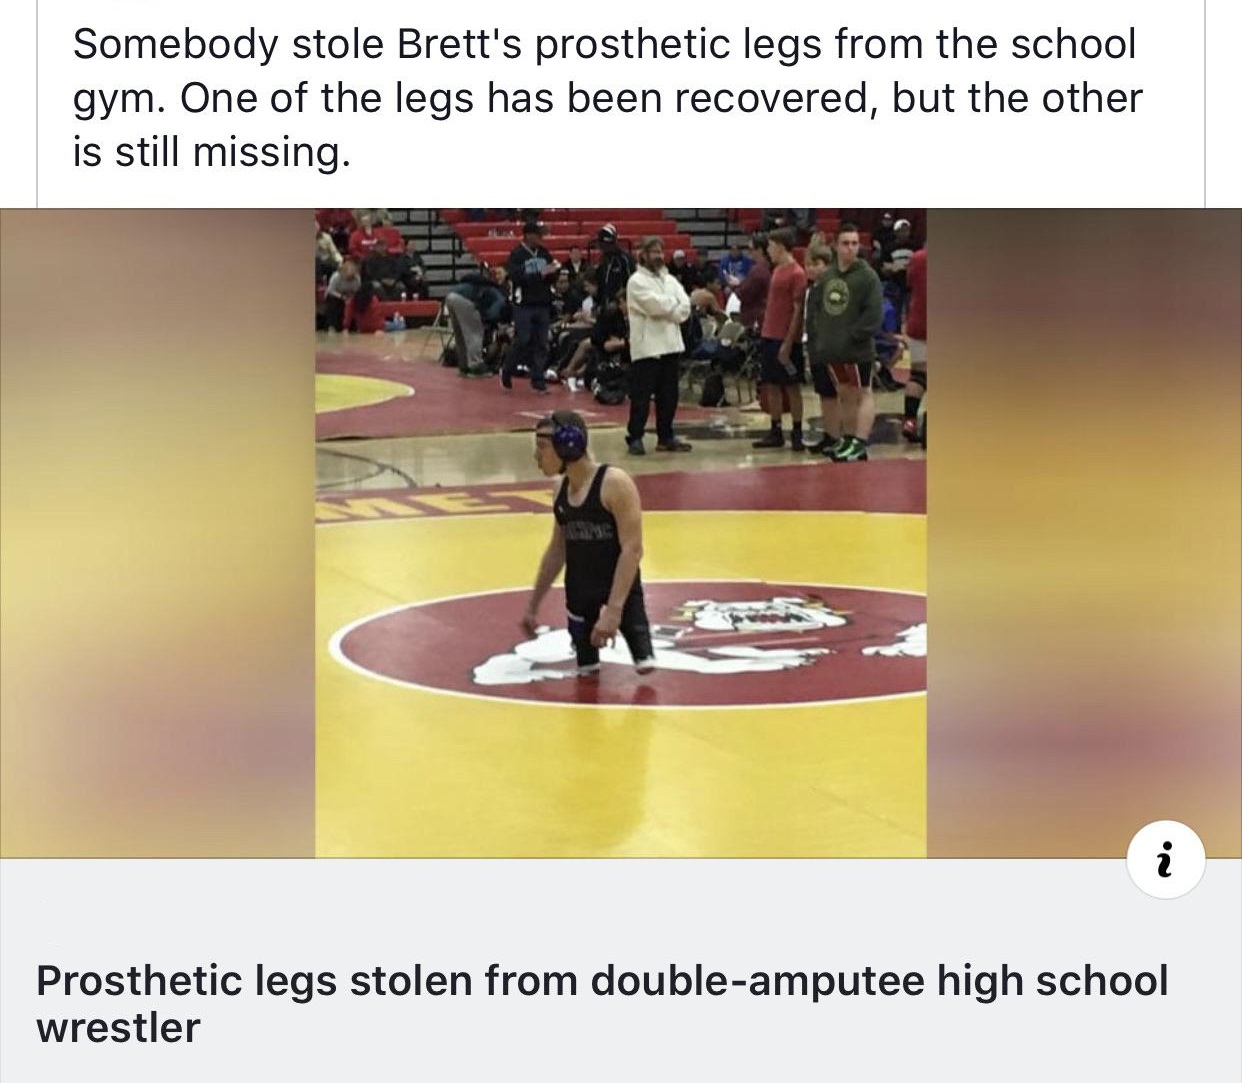 presentation - Somebody stole Brett's prosthetic legs from the school gym. One of the legs has been recovered, but the other is still missing. Prosthetic legs stolen from doubleamputee high school wrestler